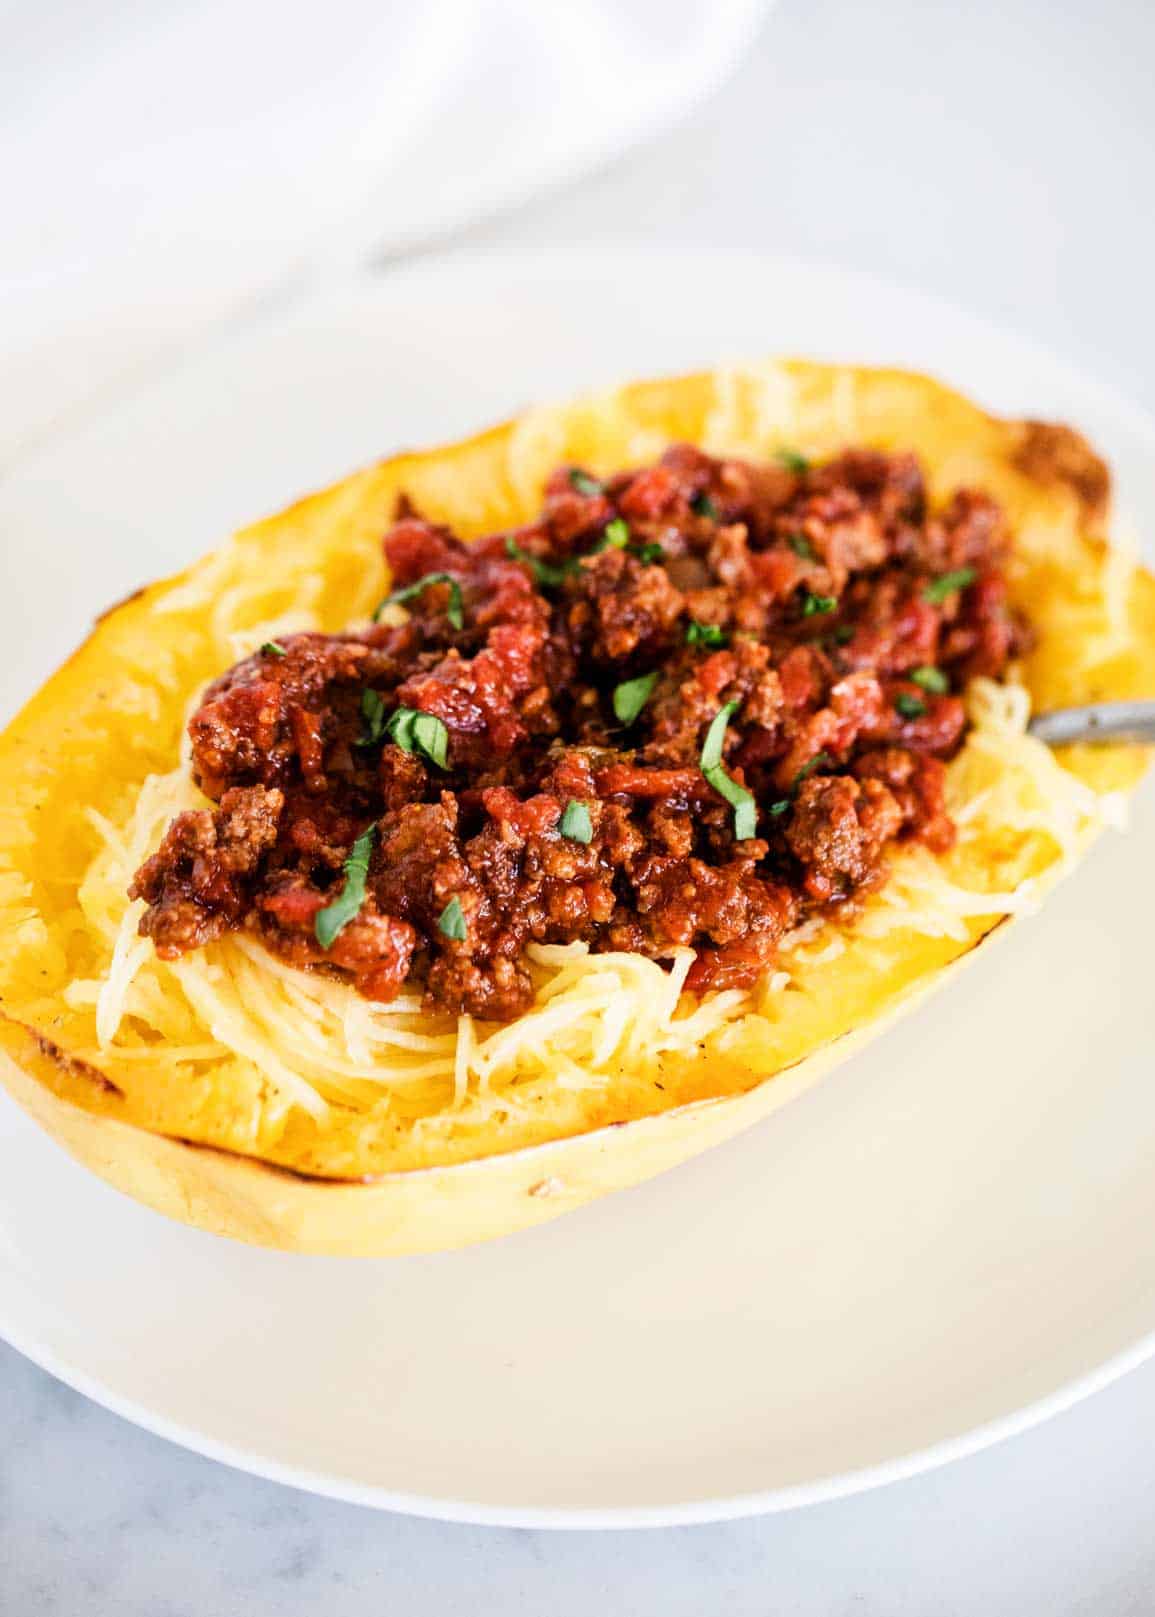 Spaghetti squash with meat sauce on plate.